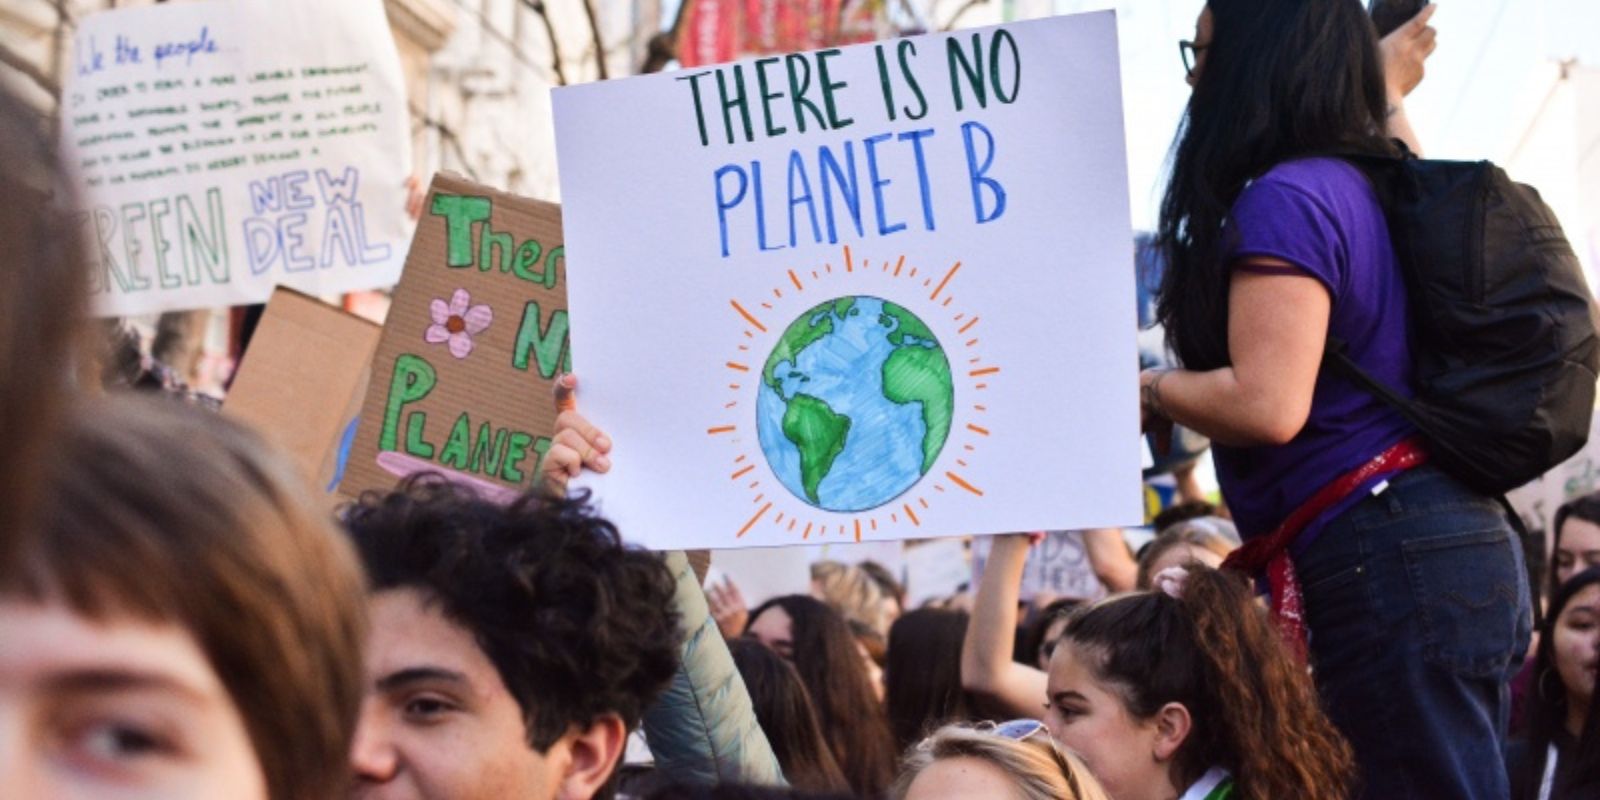 Youth in Halifax attend a climate strike. A sign can be seen in the foreground that says There's No Planet B